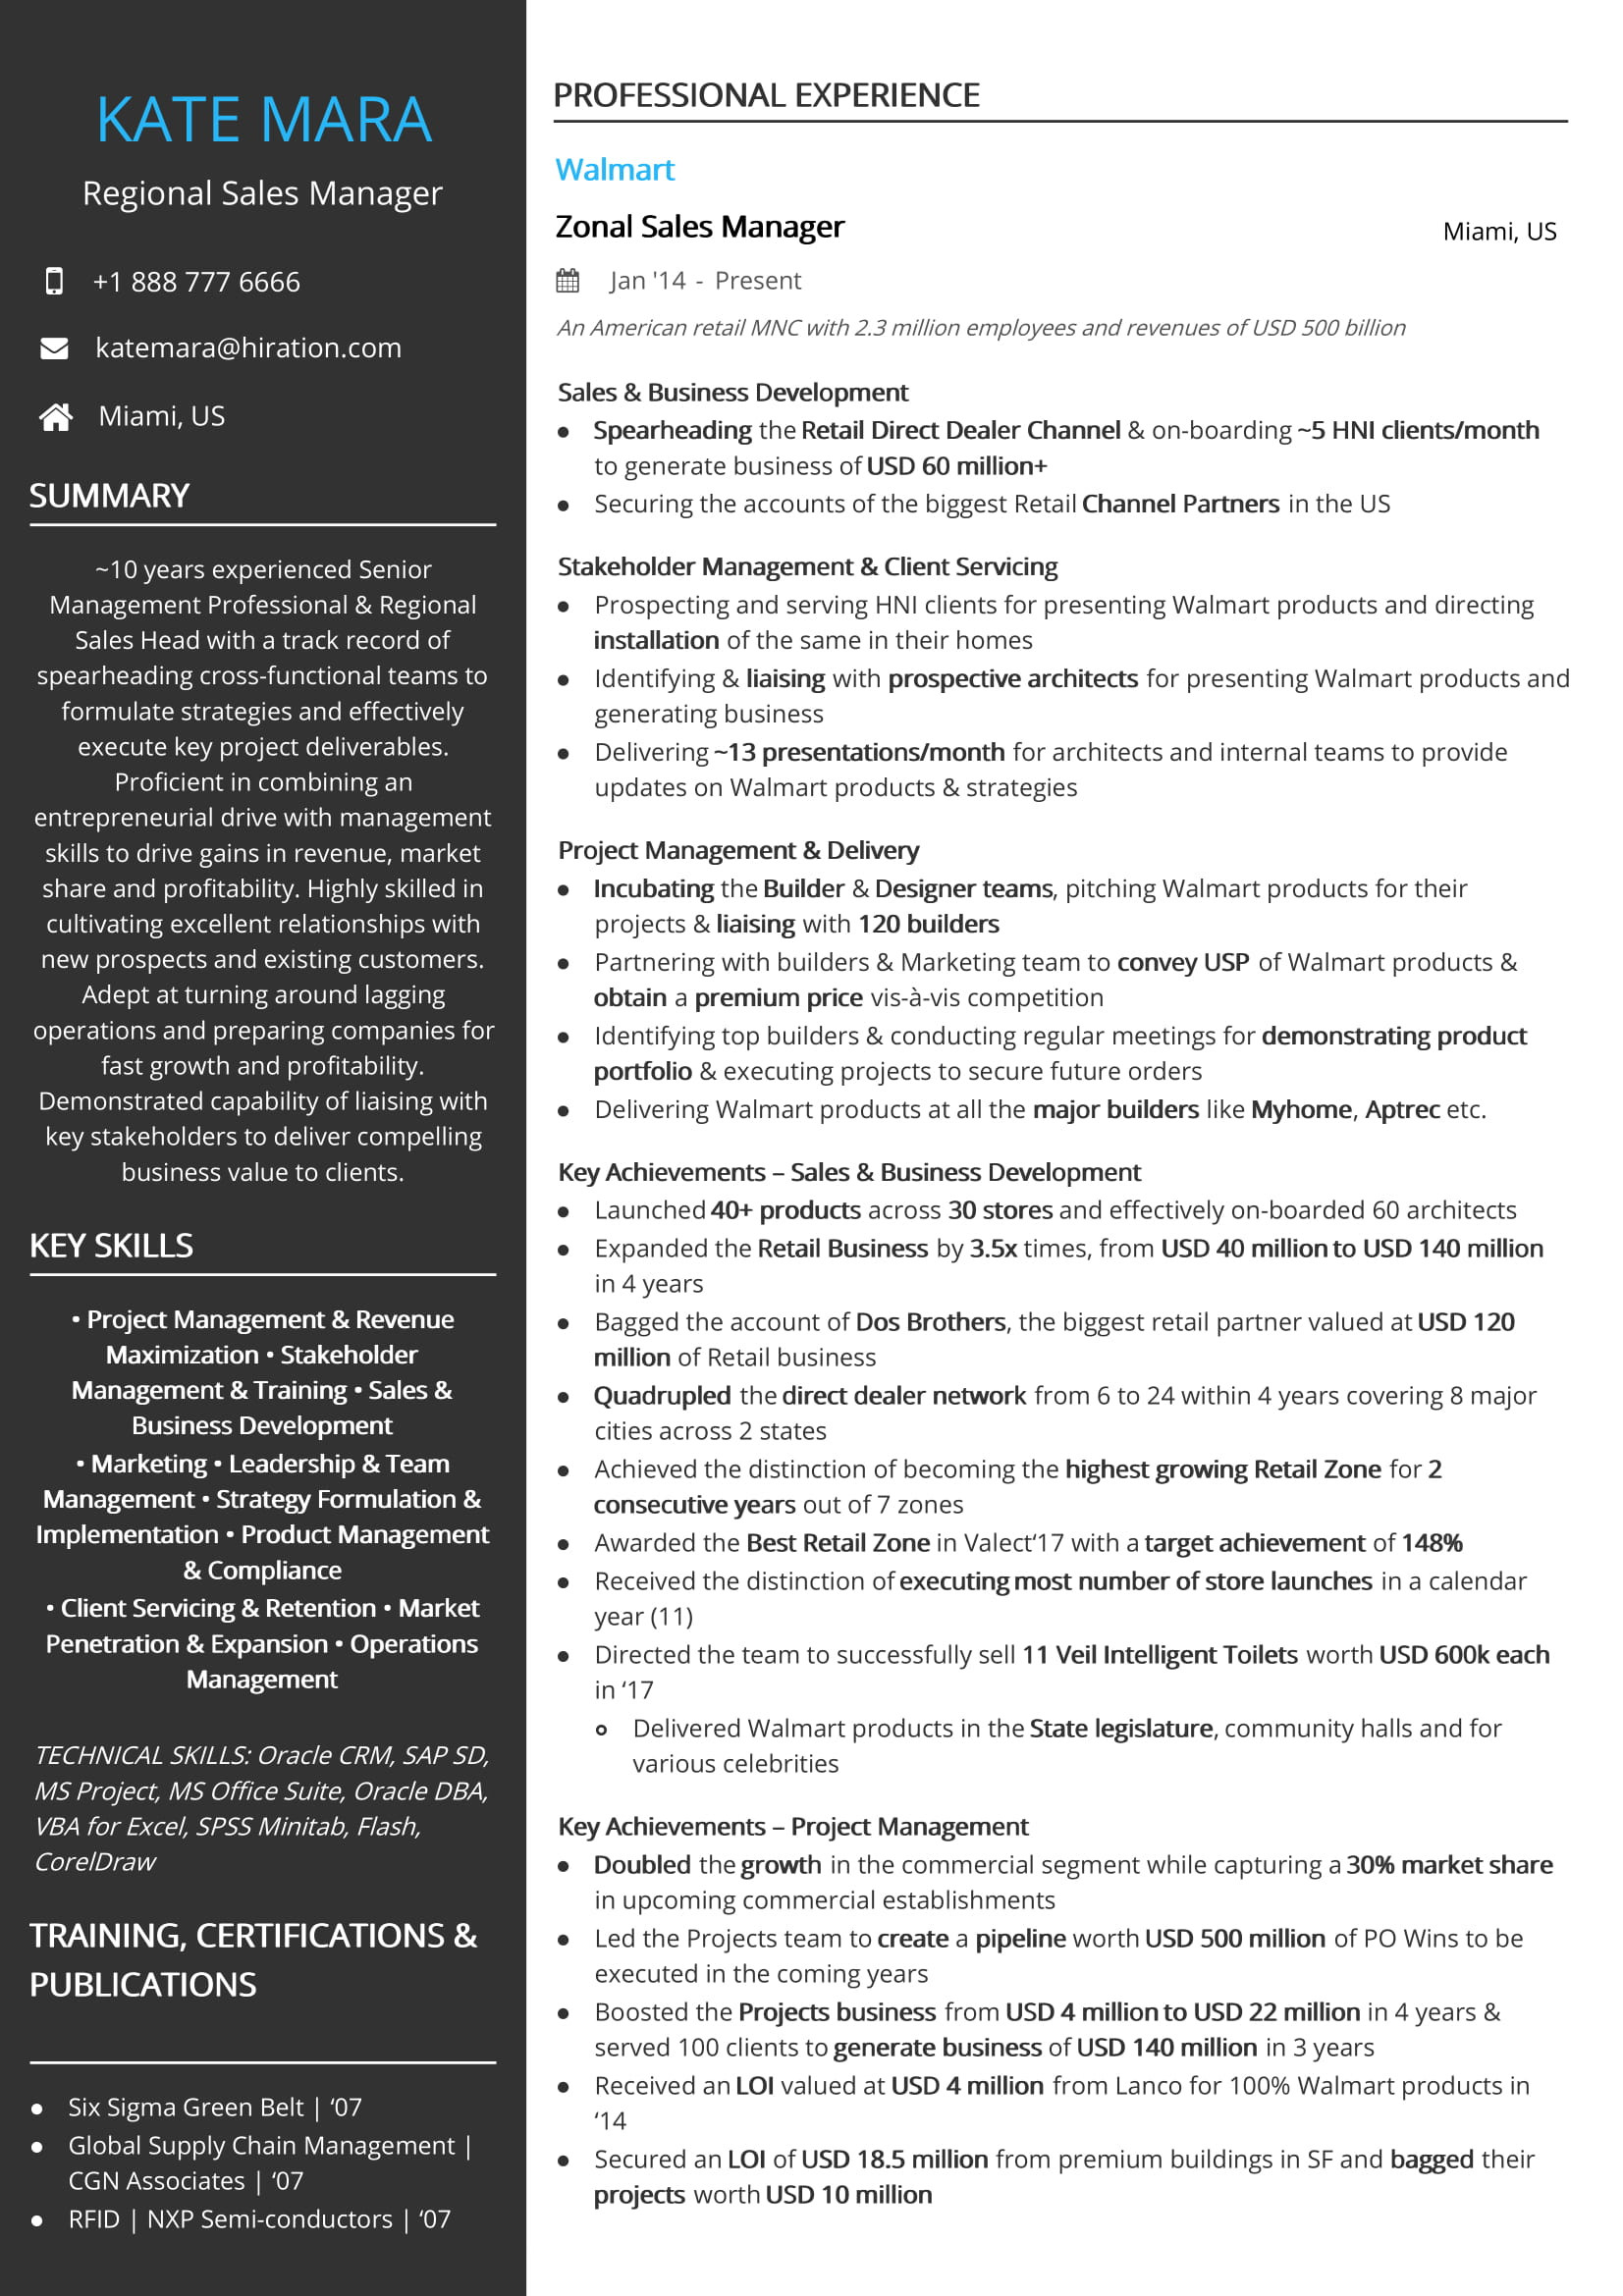 Regional Sales Manager Resume Objective Samples Free Regional Sales Manager Resume Sample 2020 by Hiration